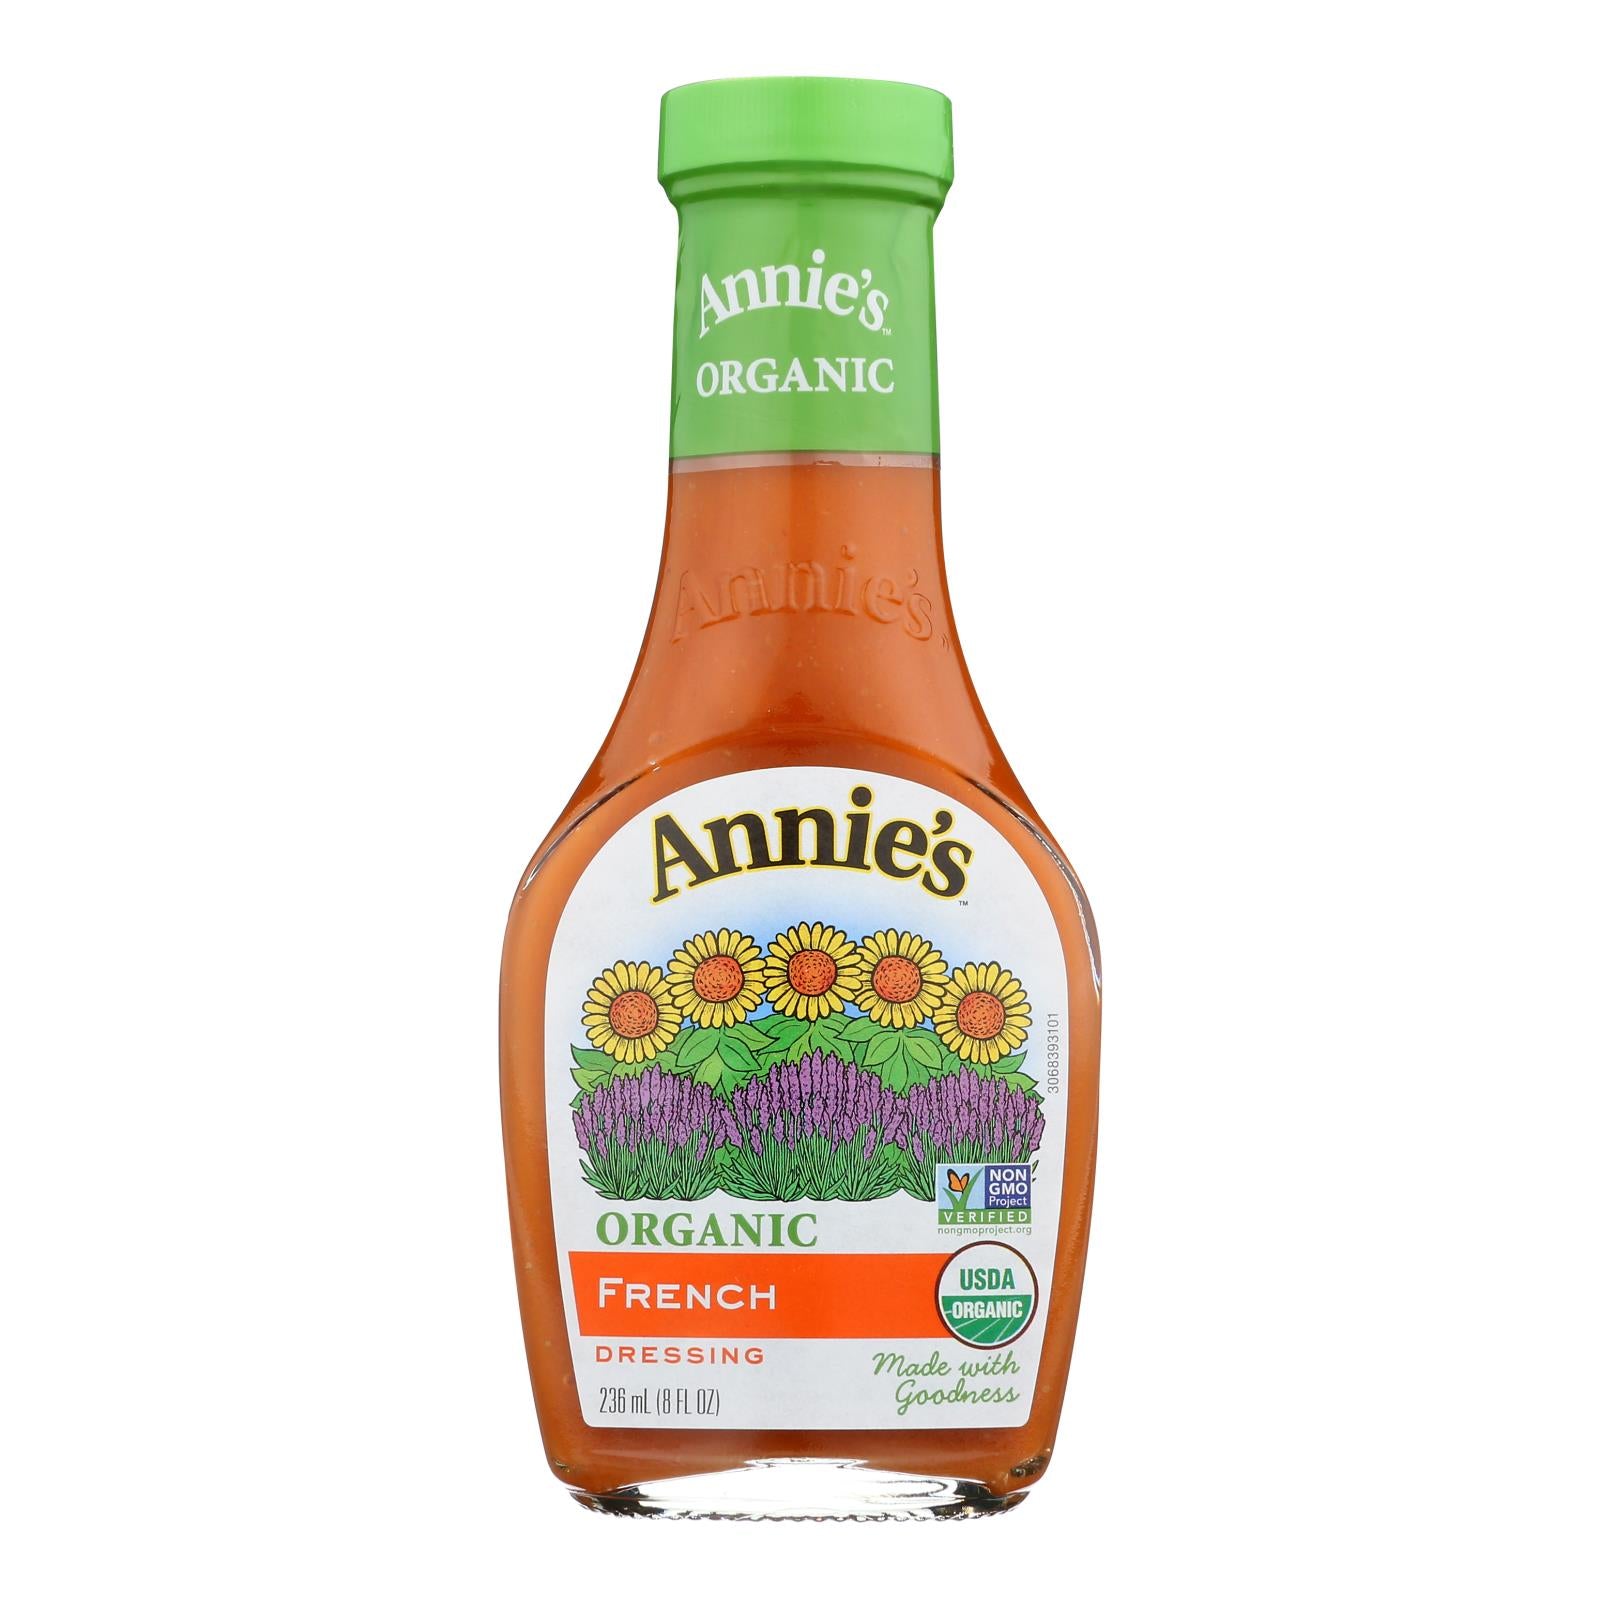 Annie'S Naturals, Annie's Naturals Organic Dressing French - Case of 6 - 8 fl oz. (Pack of 6)